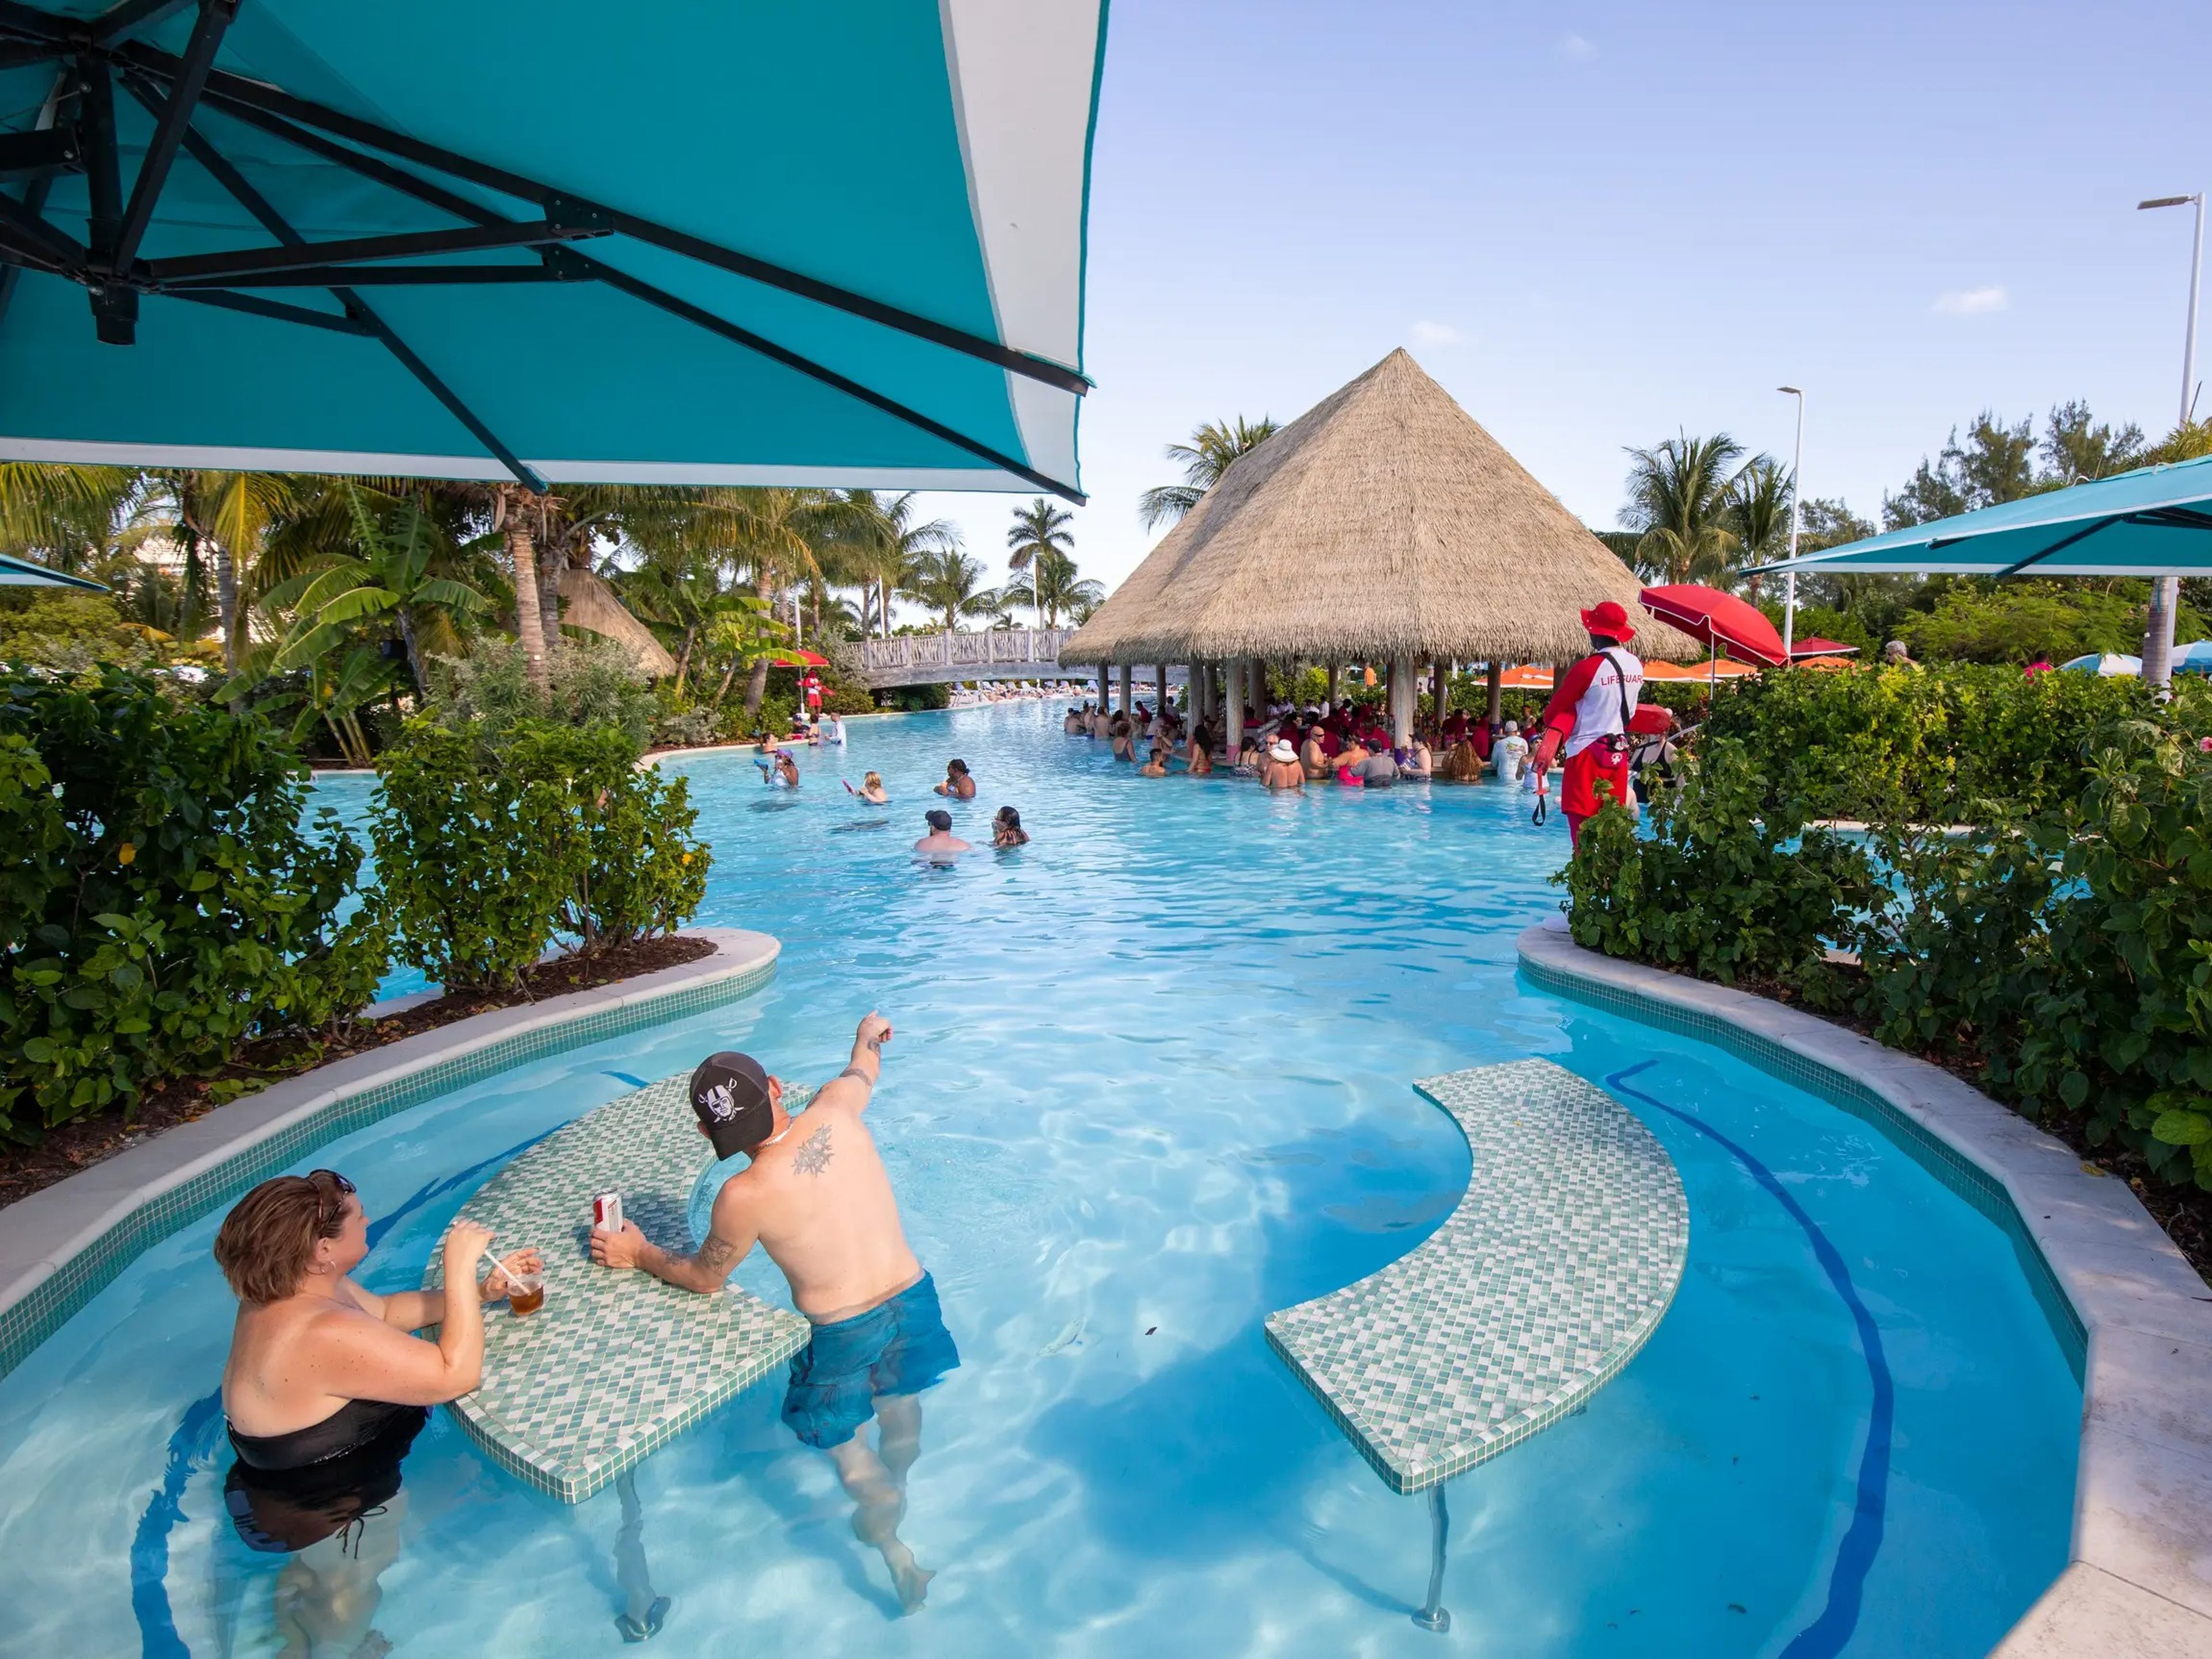 Royal Caribbean International's Perfect Day at CocoCay private island